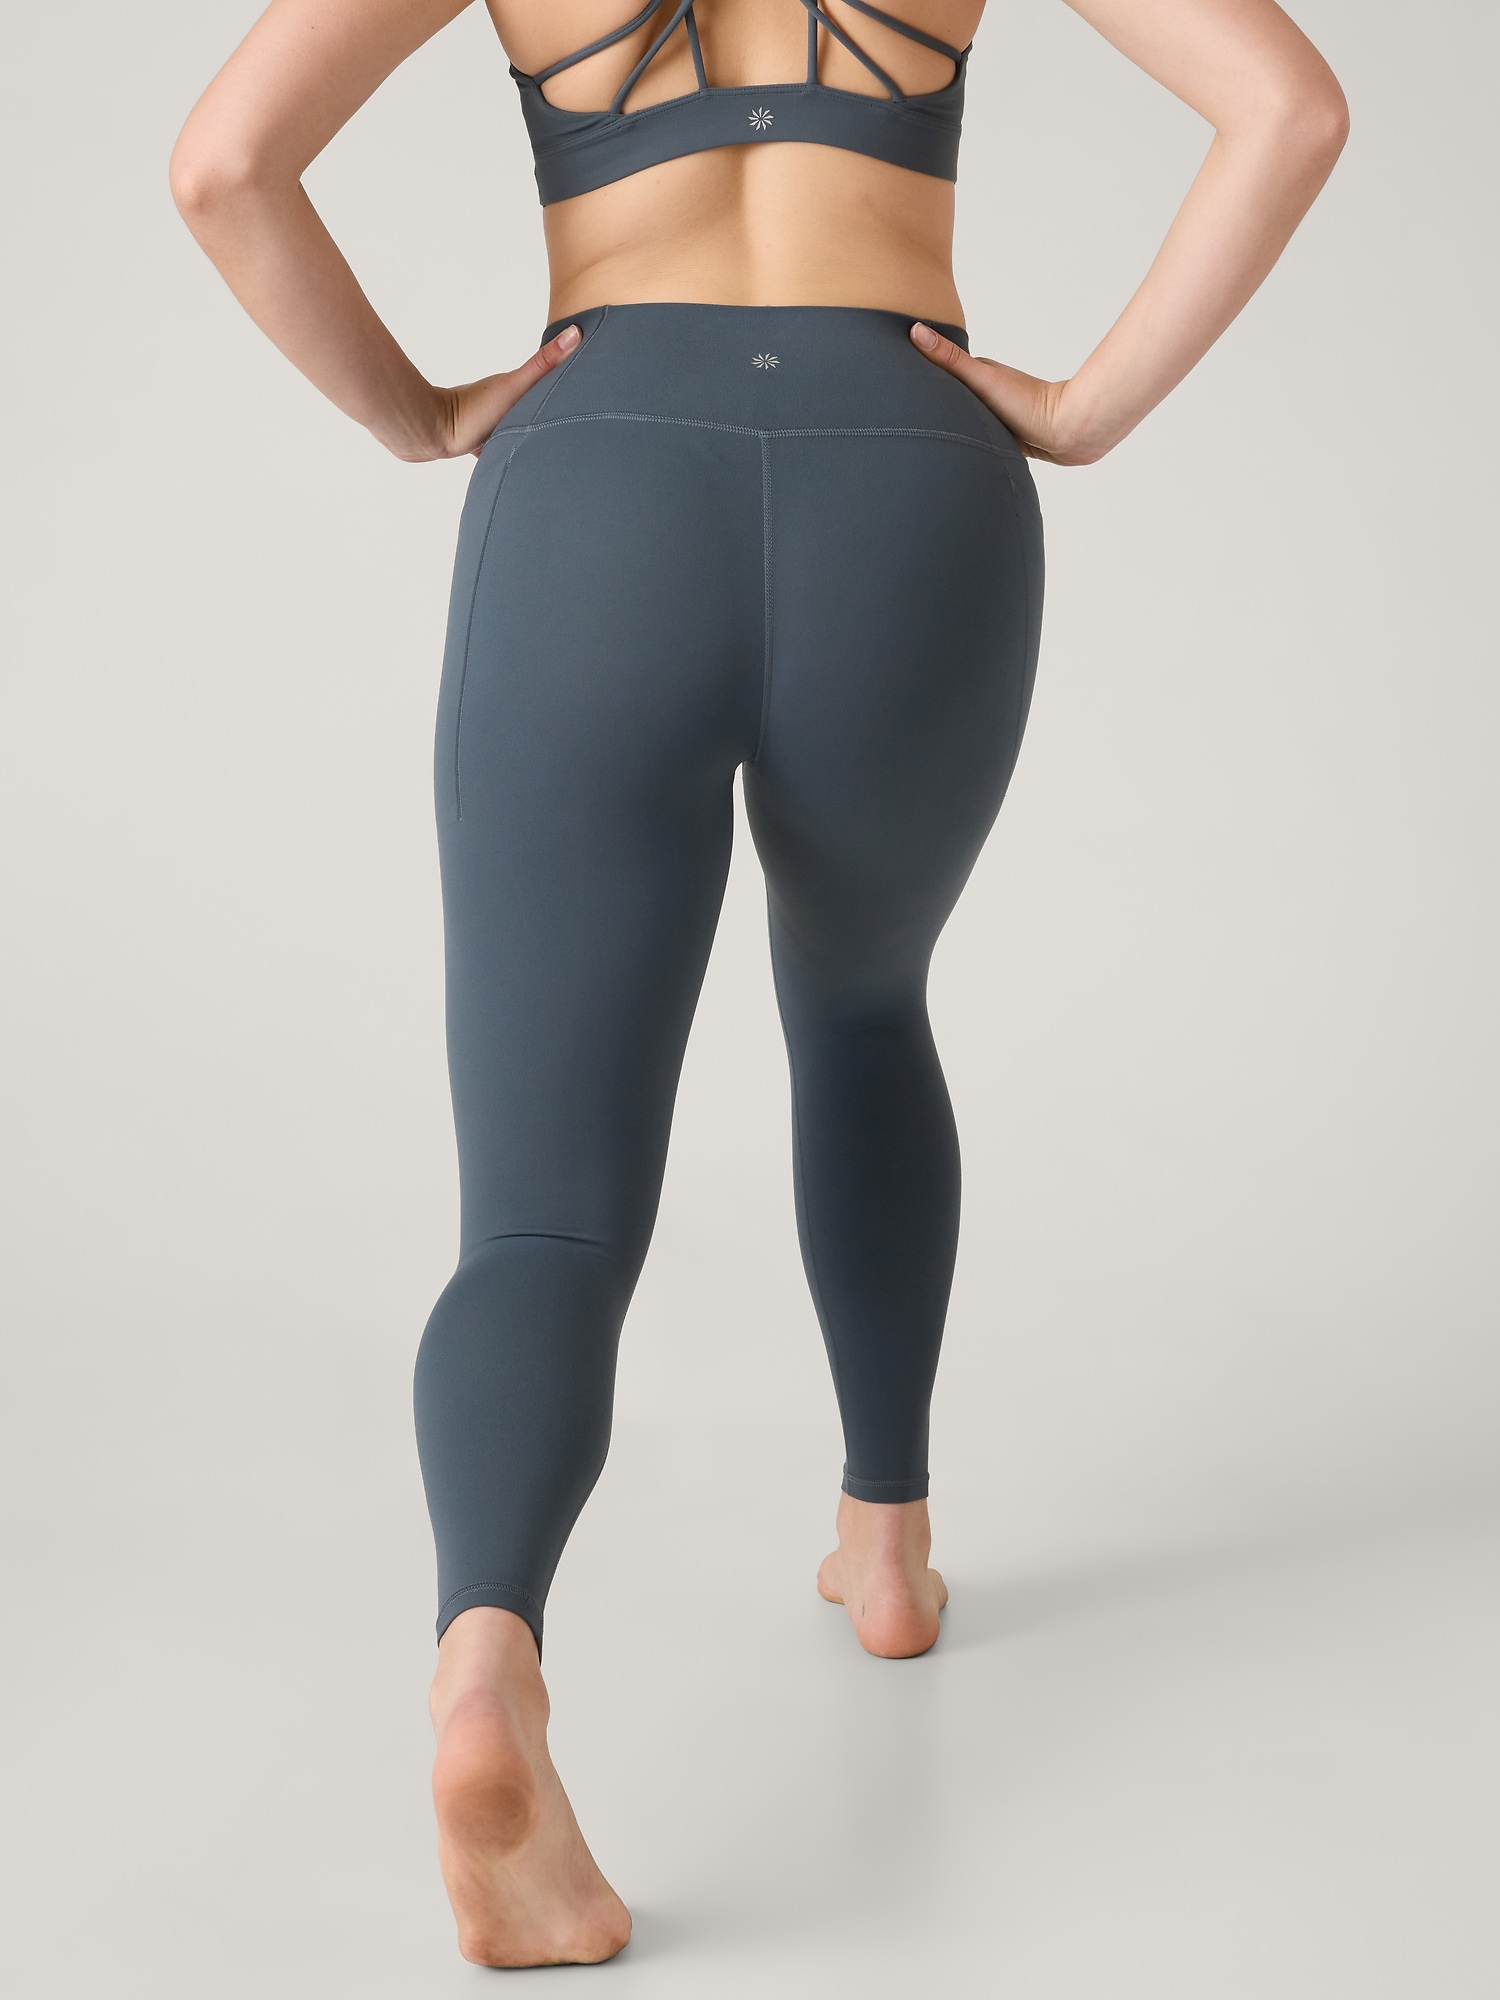 Sometimes you just want to wear black leggings :-) Invigorate 25